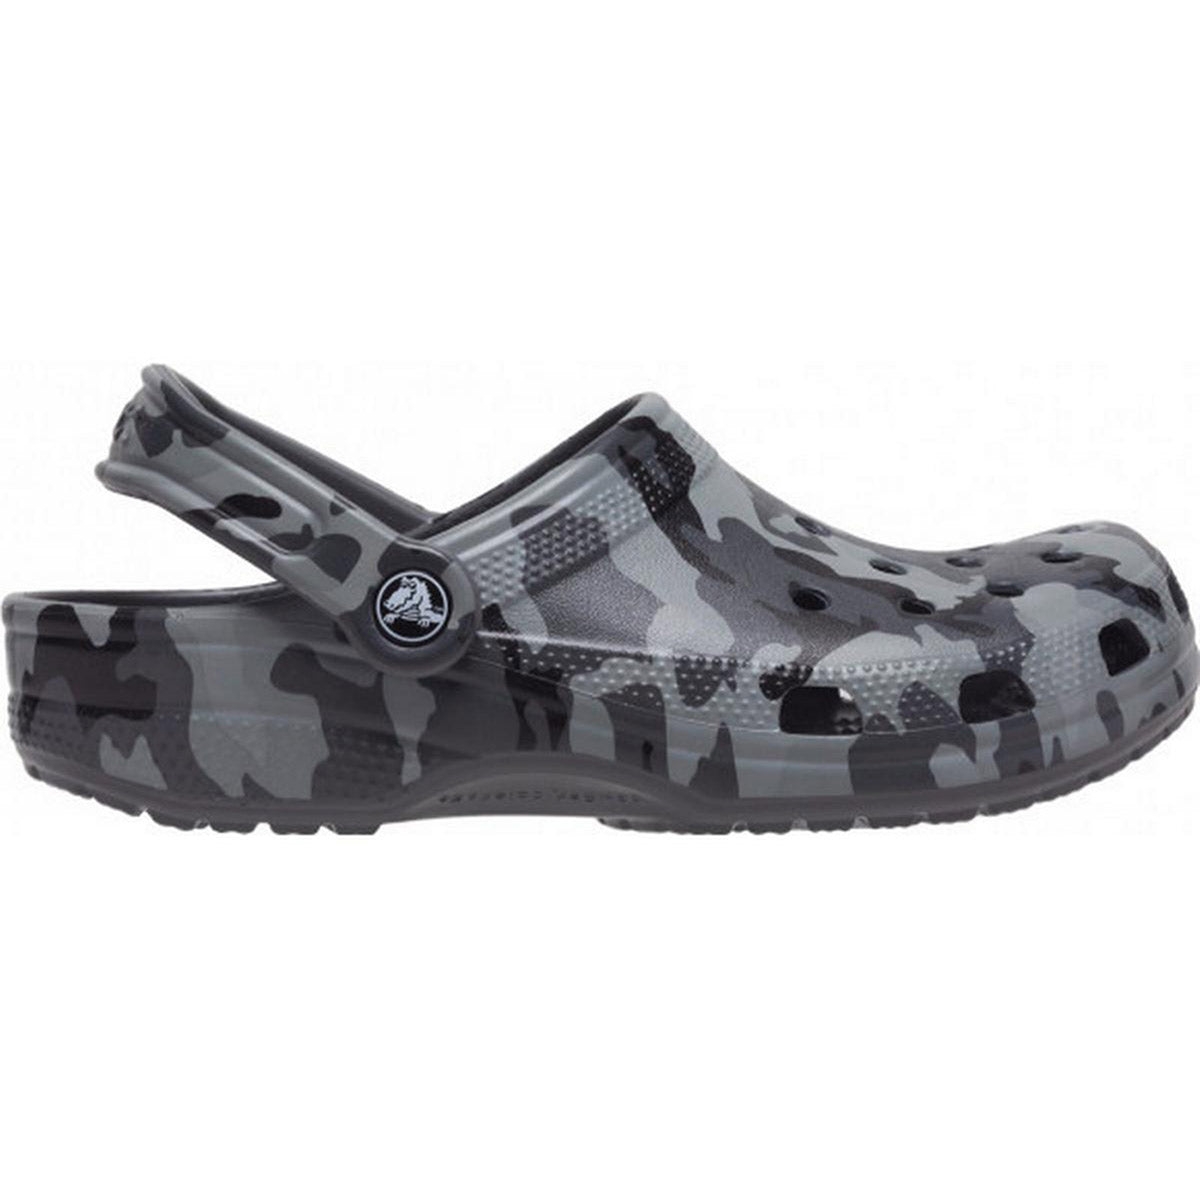 A single camo-patterned Crocs Classic Camo/Slate Gray - Mens clog shoe made from Croslite material, positioned on a white background.